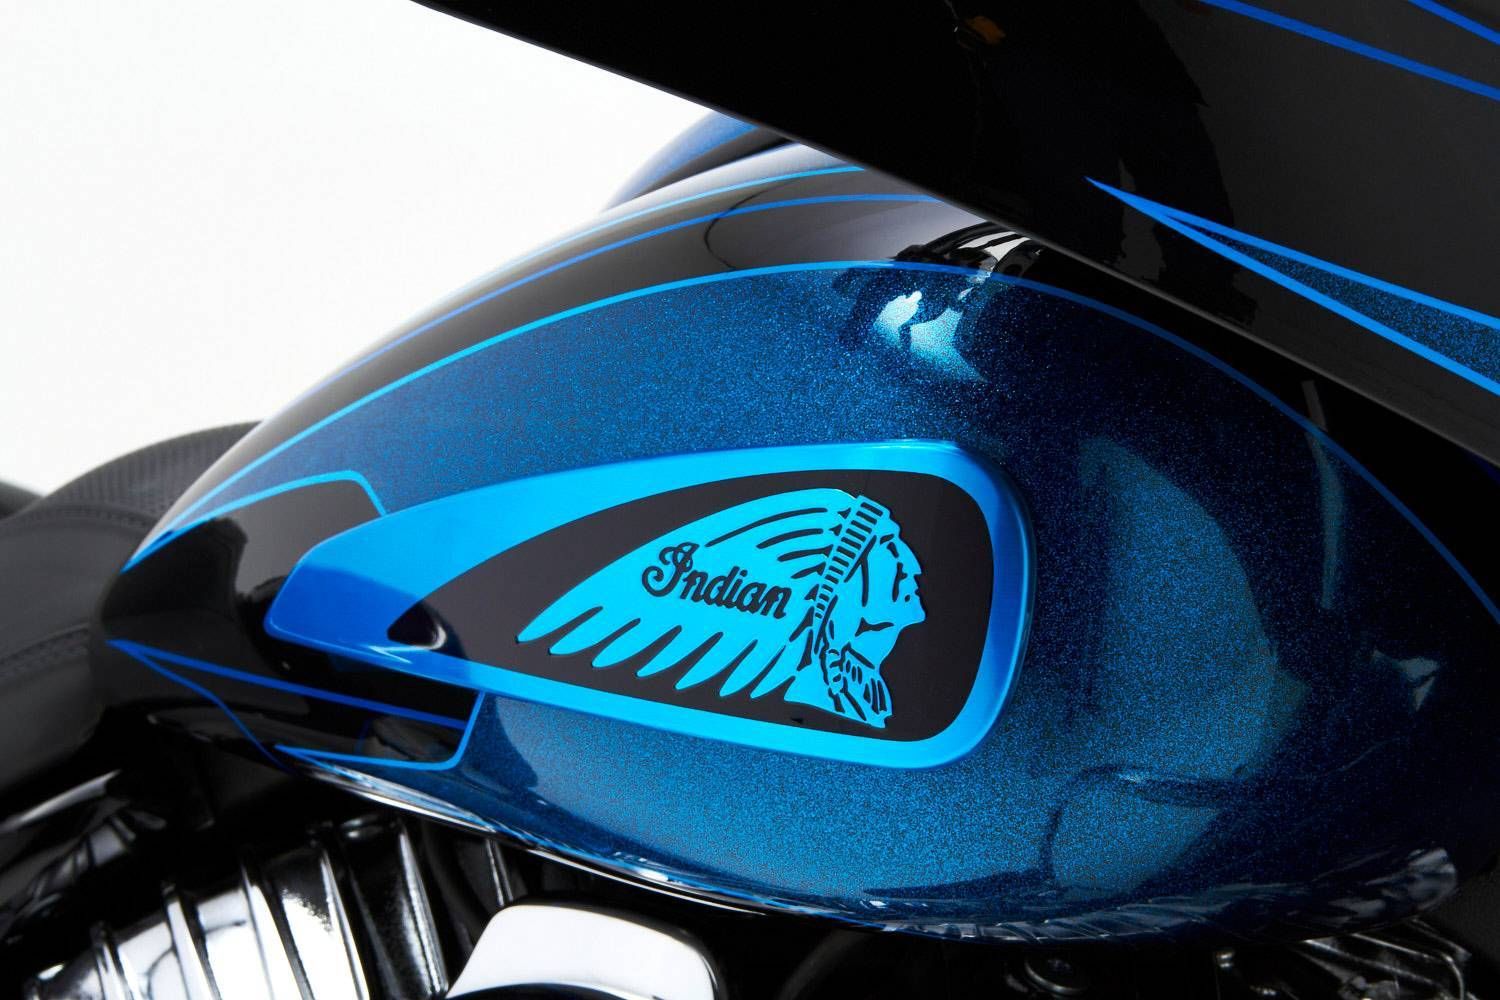 2022 Indian Chieftain® Limited in Hollister, California - Photo 10